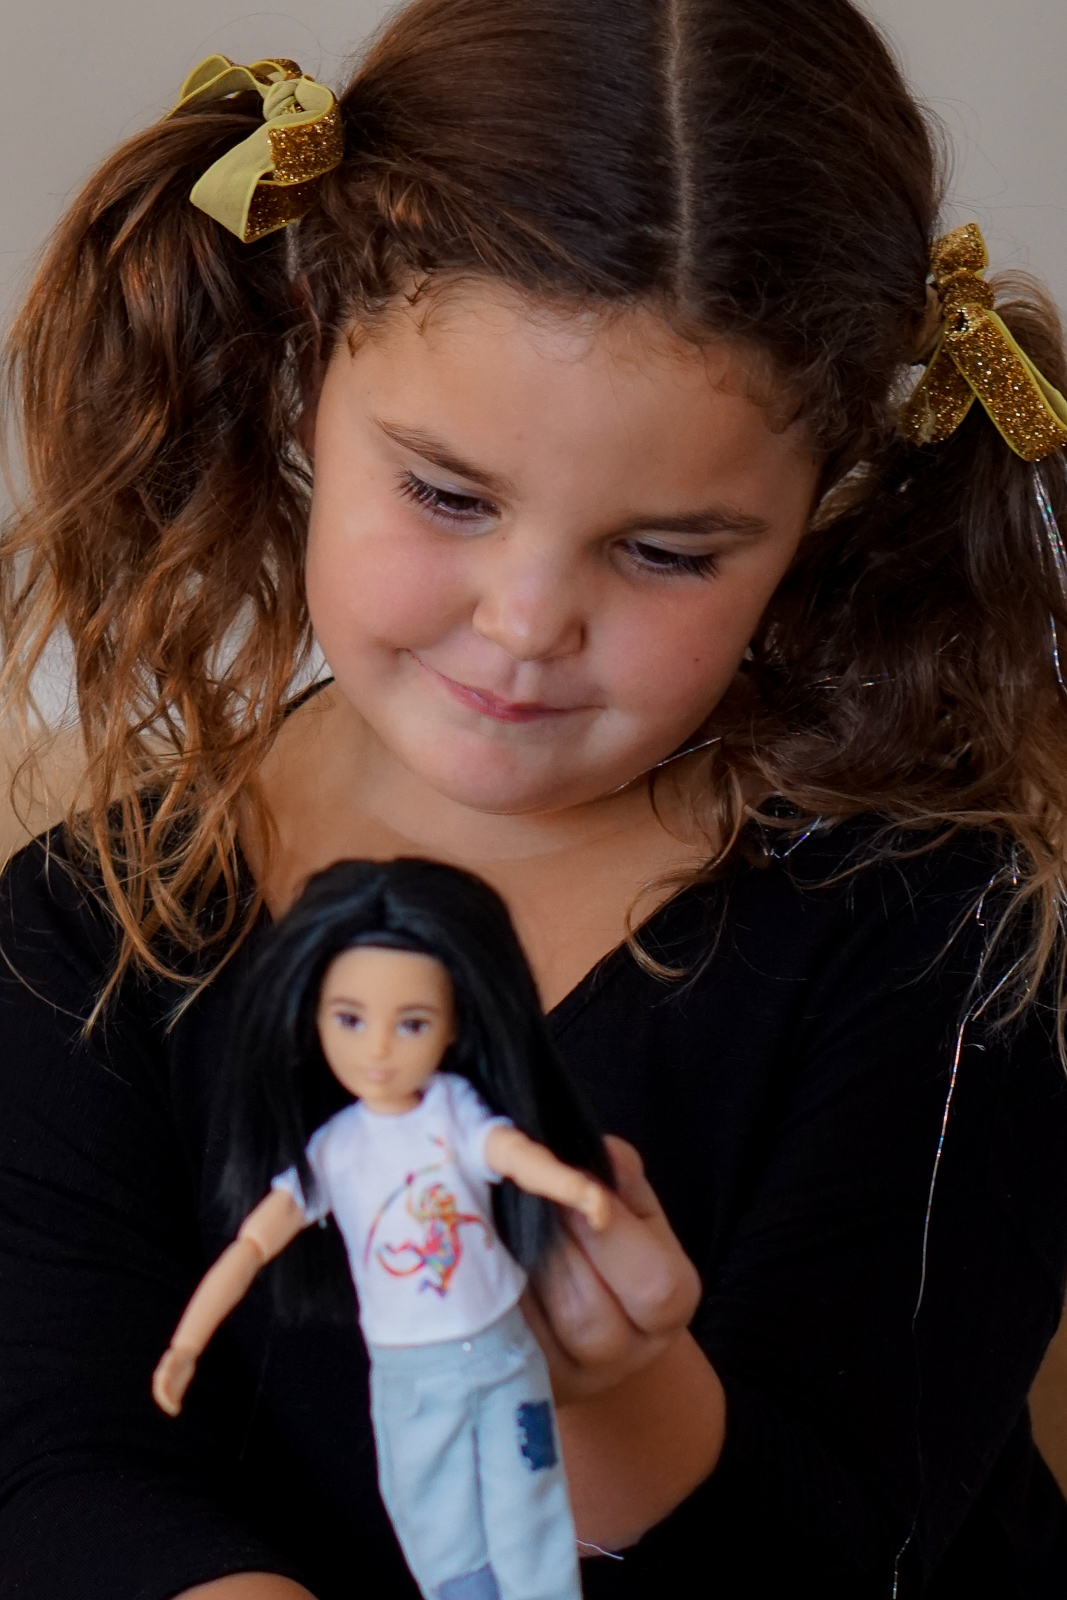 Creatable World Mattel's Gender-Neutral Dolls - Play Without Labels